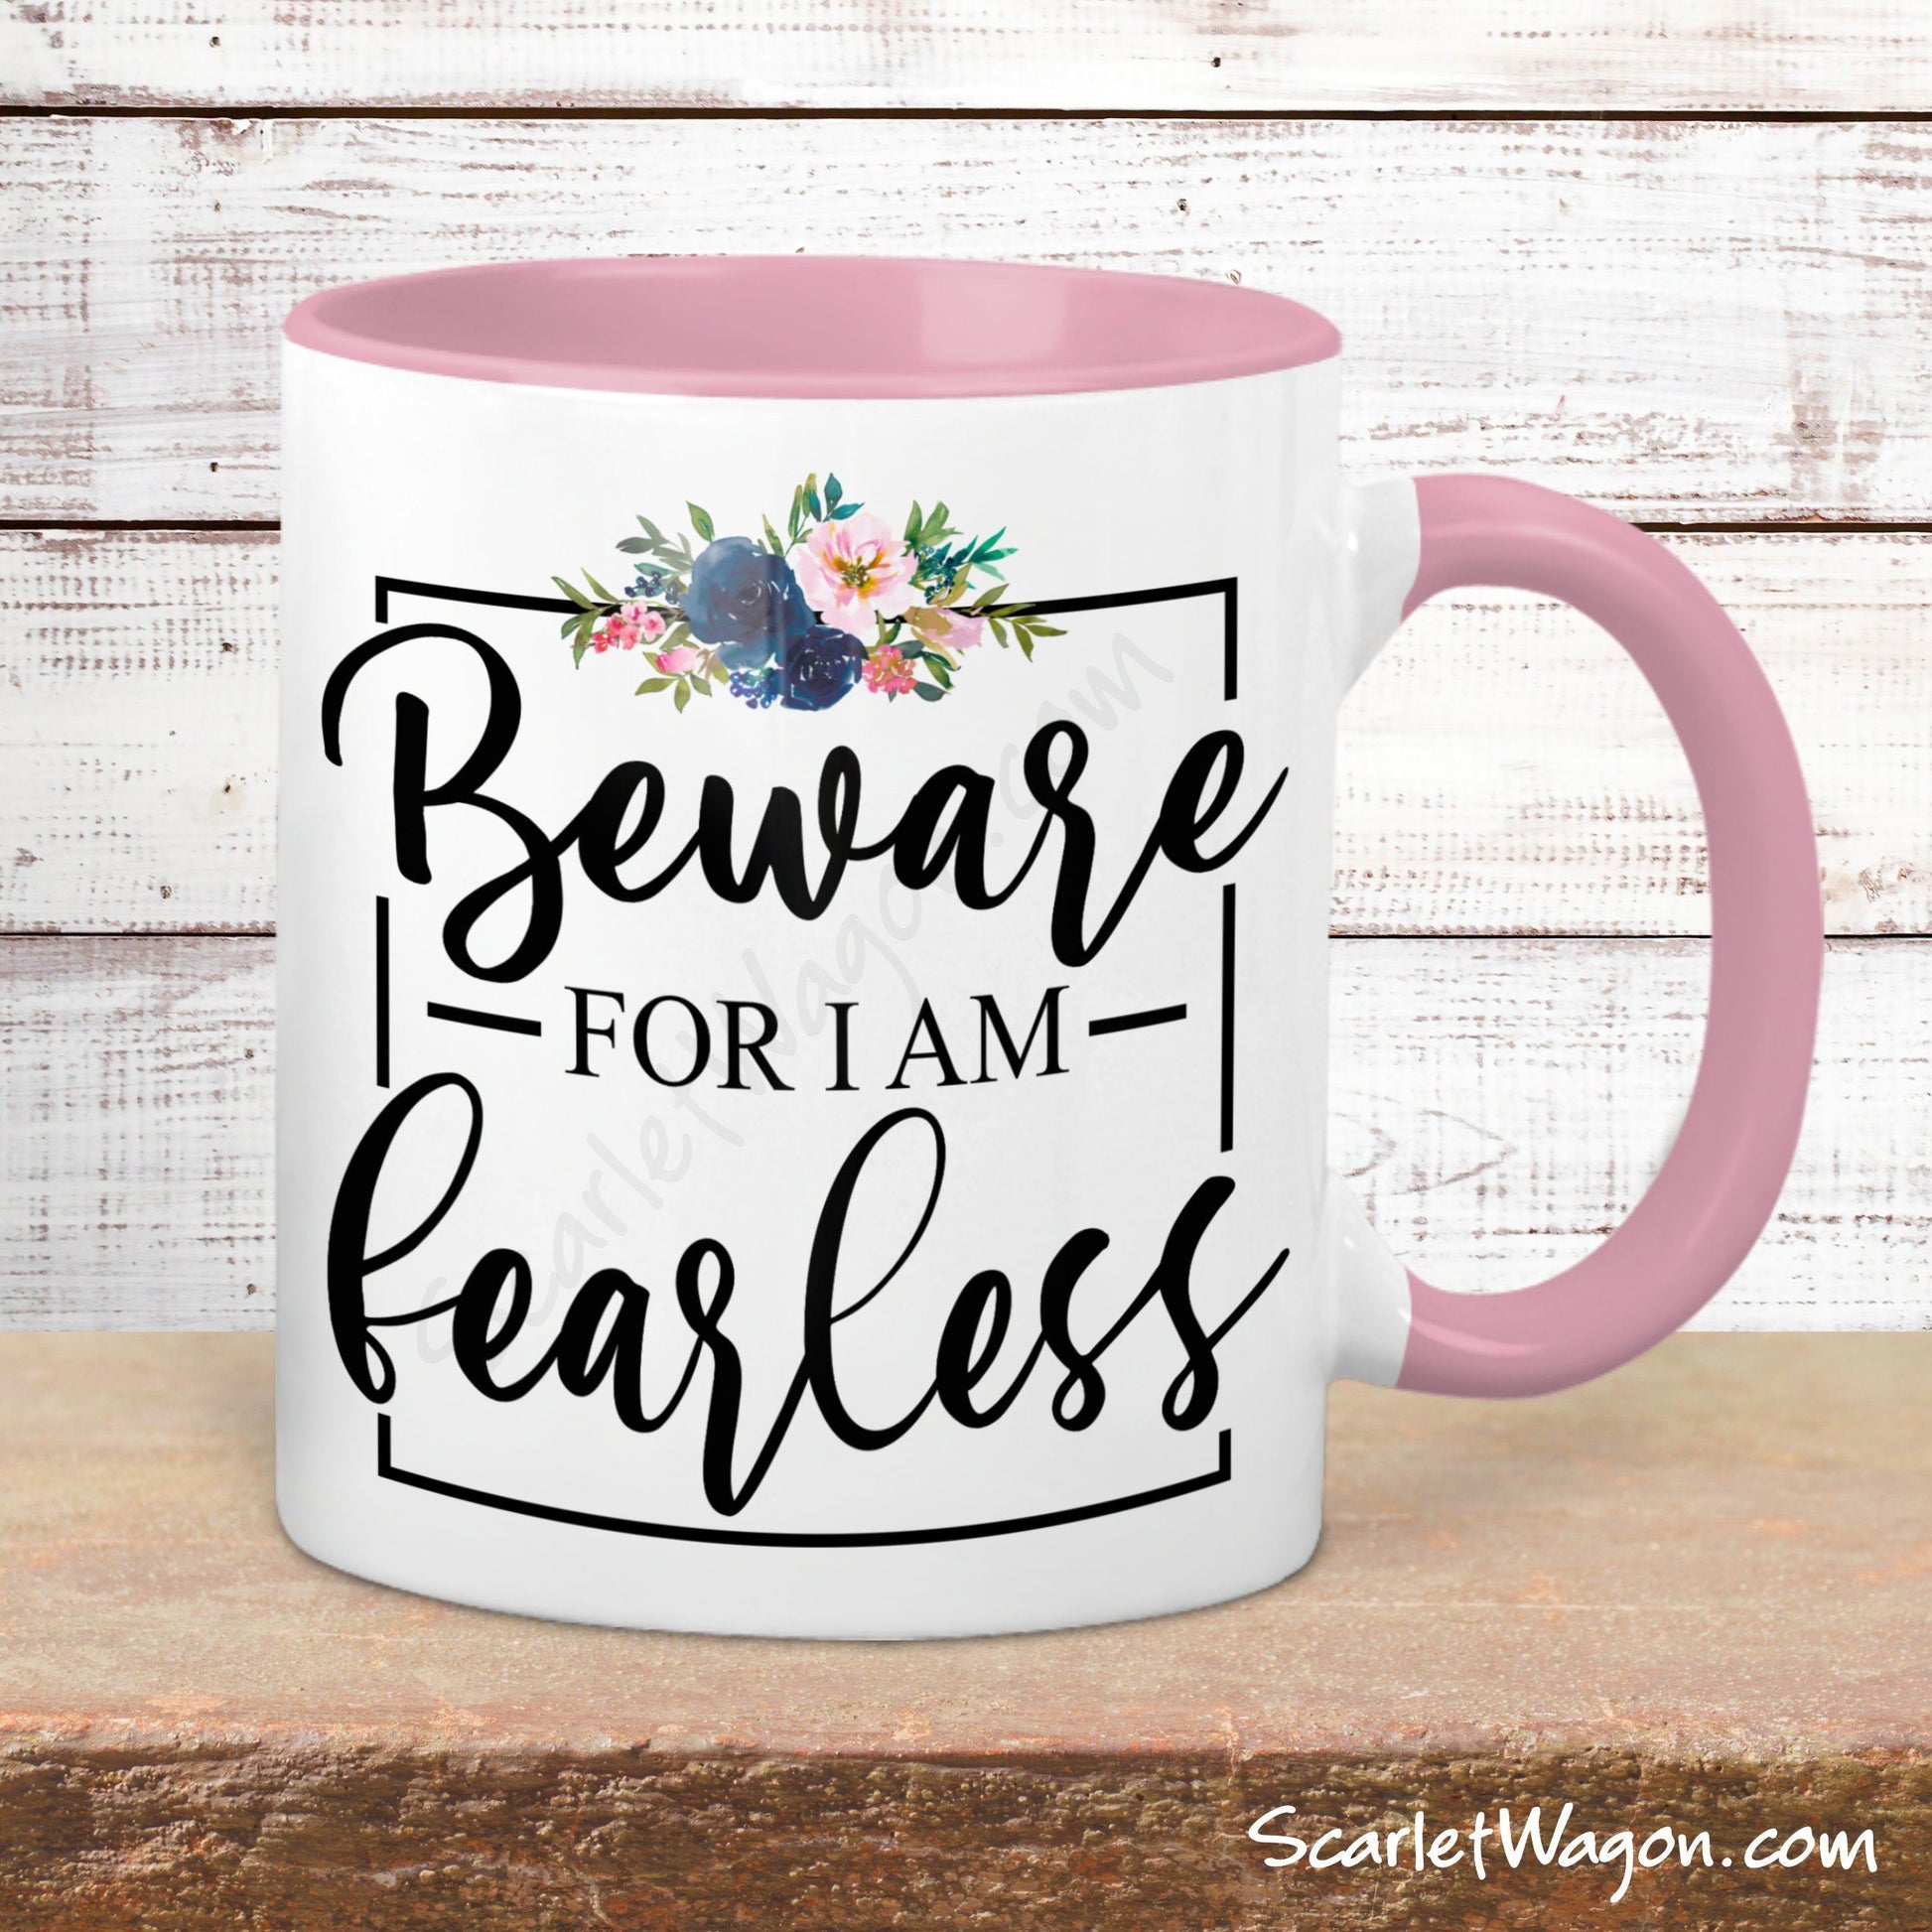 Beware for I am Fearless Coffee Mug mug The Scarlet Wagon Boutique 11 ounce Pink 